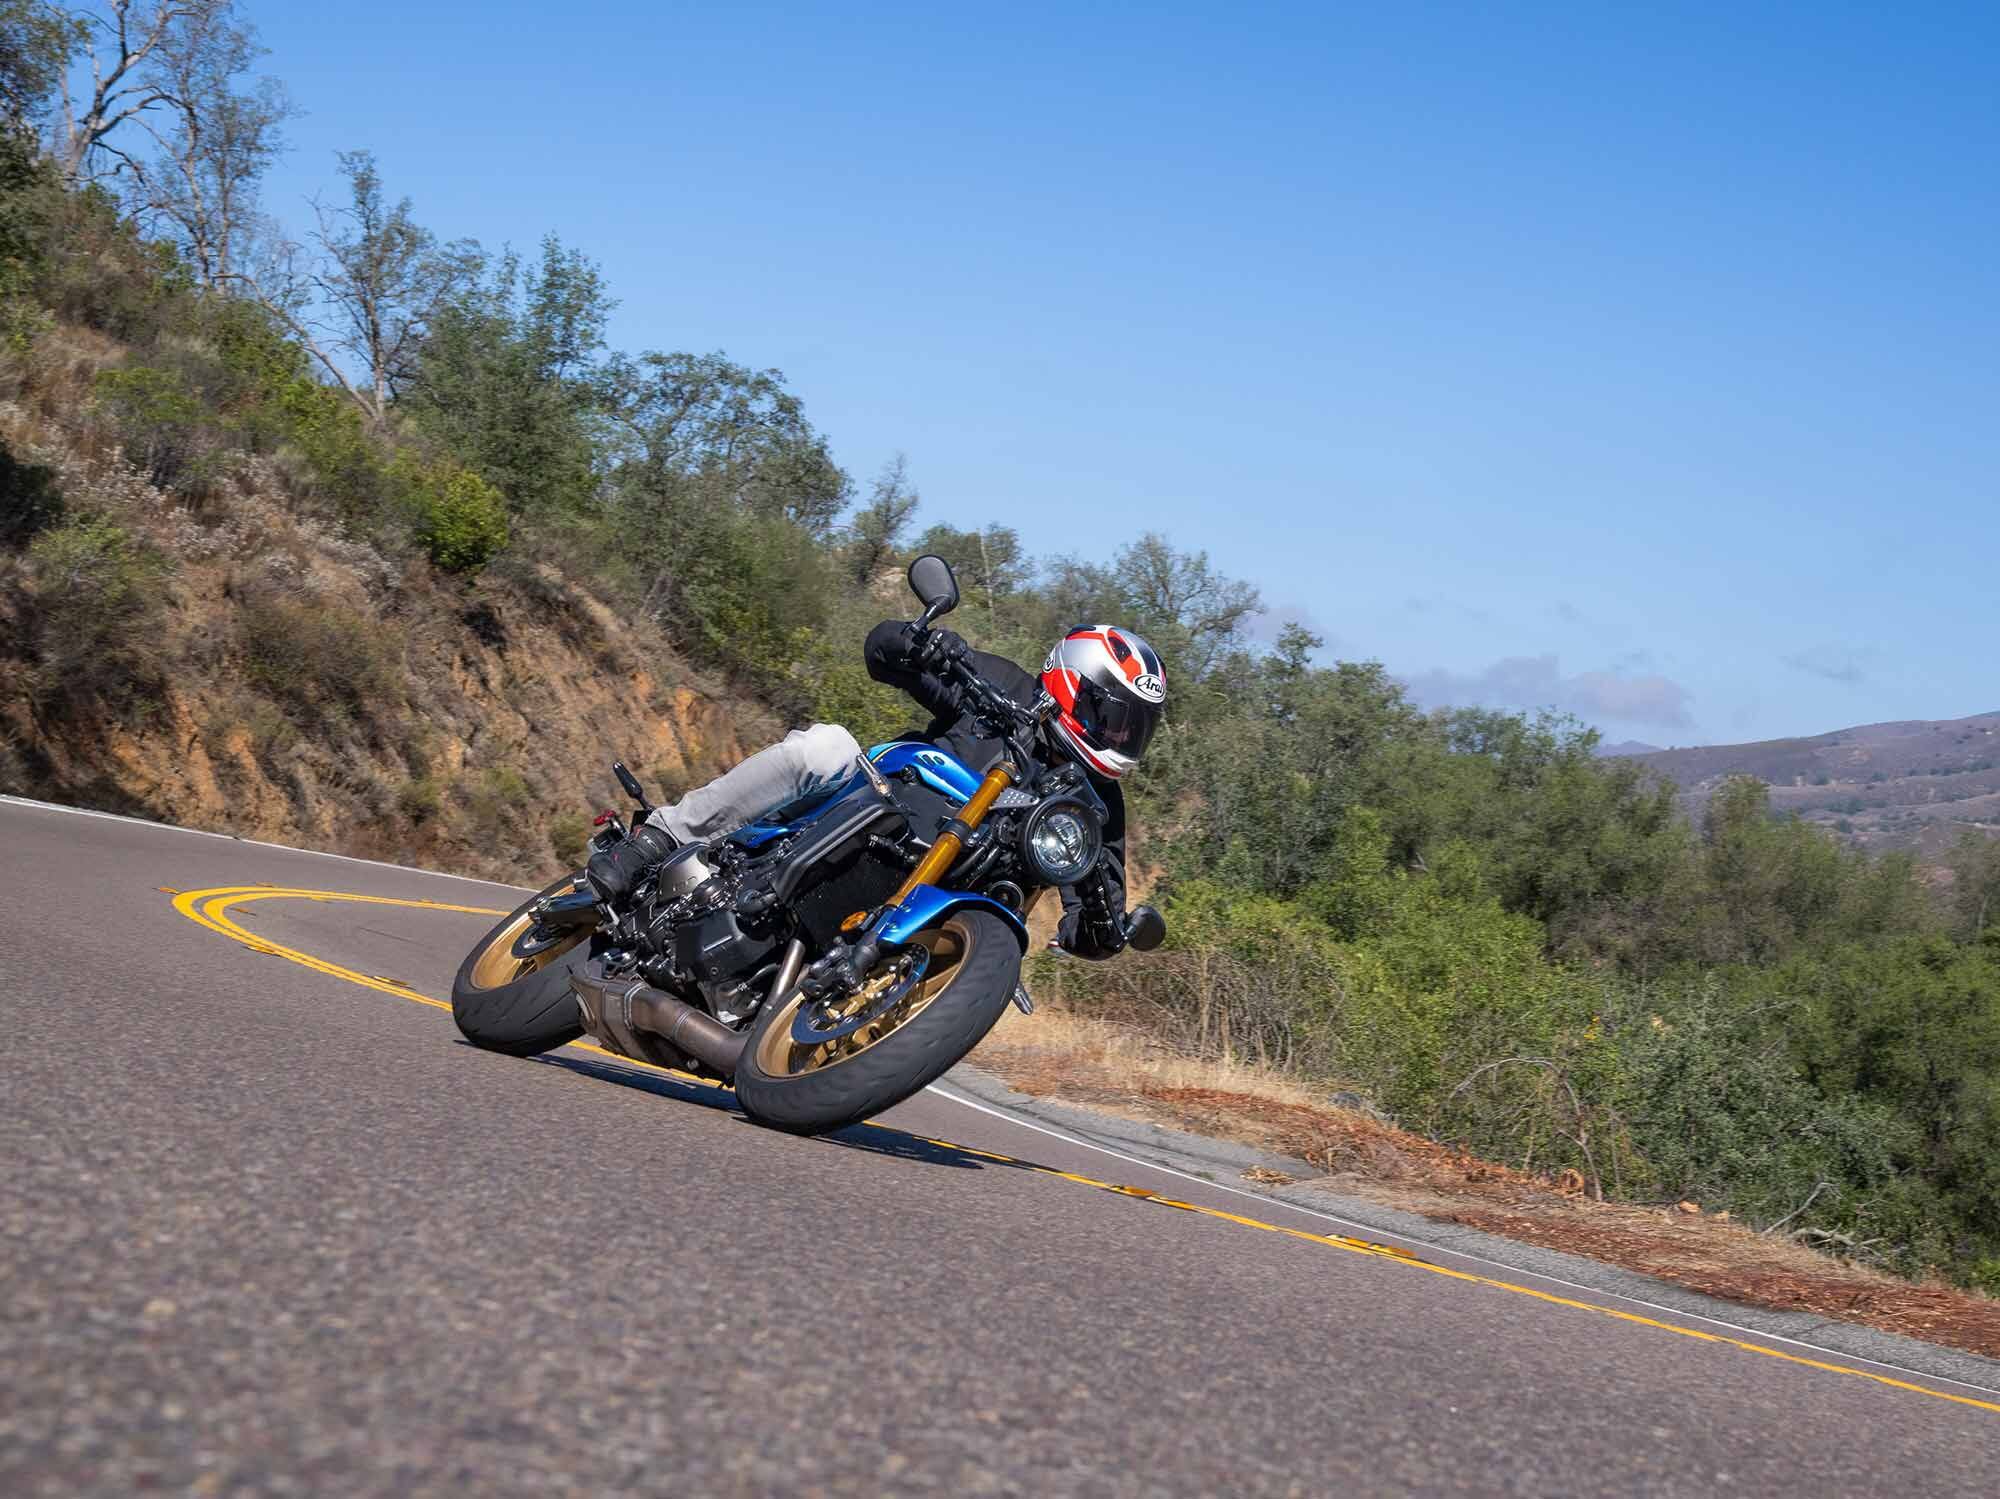 Saddle up aboard Yamaha’s overhauled 2022 XSR900 retro sport naked in this review.